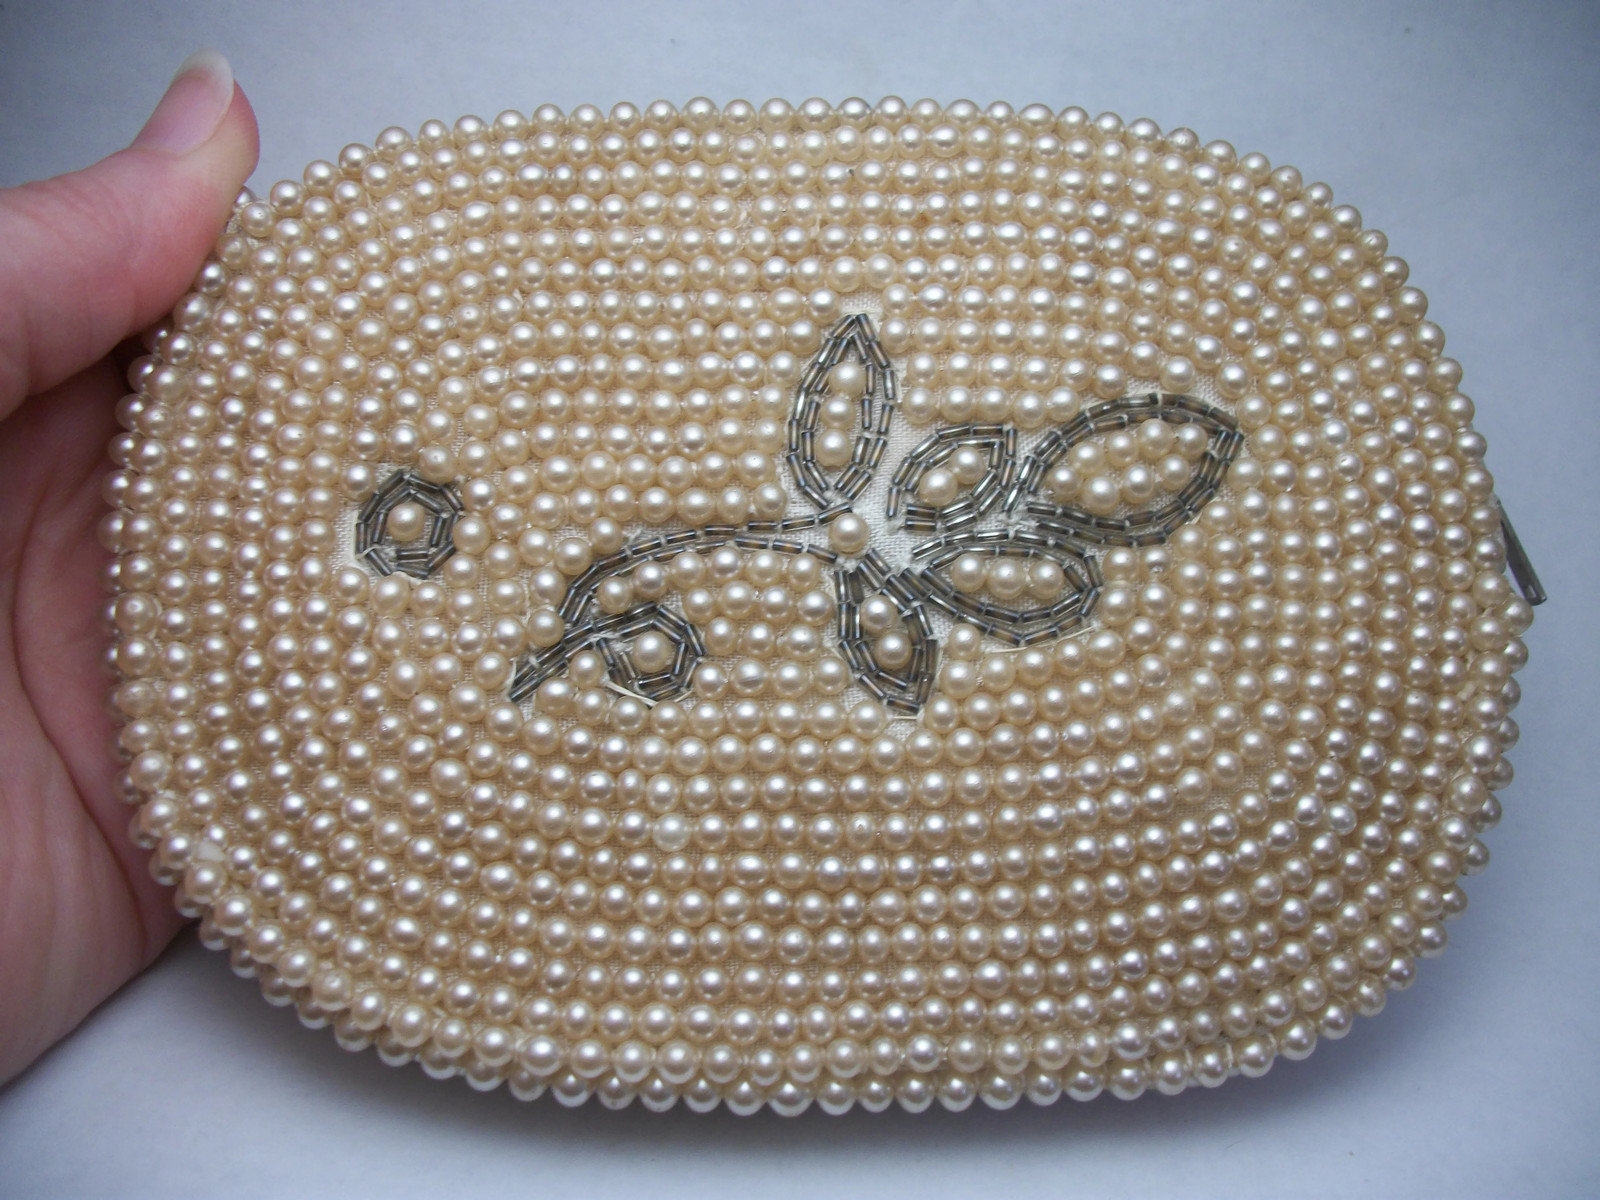 1940s Beaded Clutch Purse Covered In Faux Pearls – Toadstool Farm Vintage